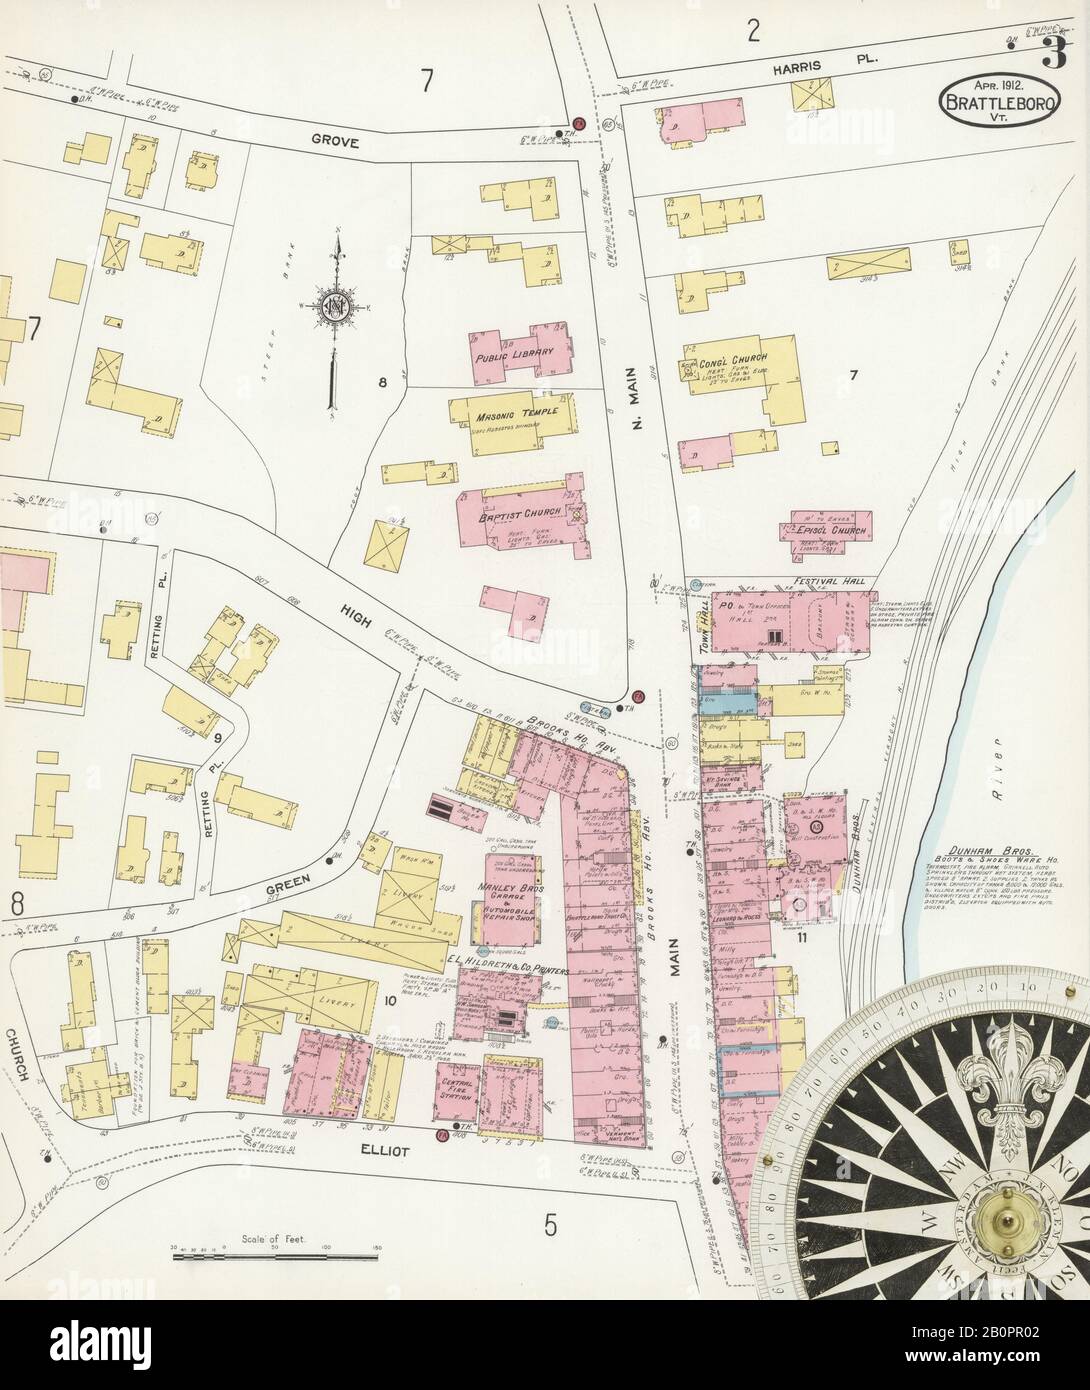 Image 3 of Sanborn Fire Insurance Map from Brattleboro, Windham County, Vermont. Apr 1912. 17 Sheet(s), America, street map with a Nineteenth Century compass Stock Photo